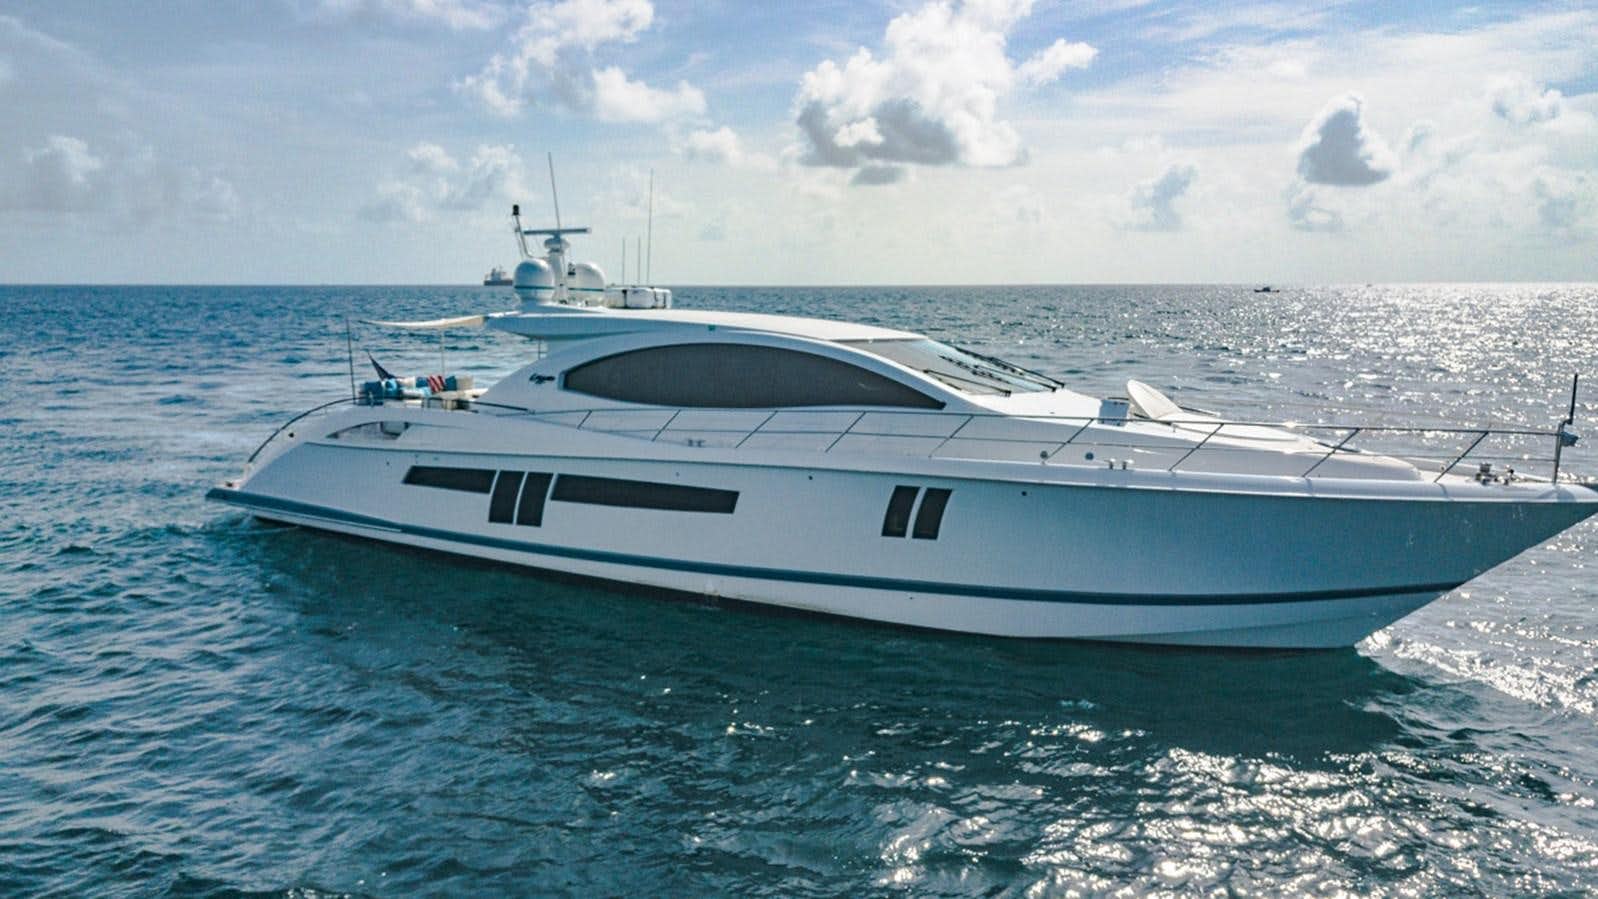 Watch Video for MOJO Yacht for Sale